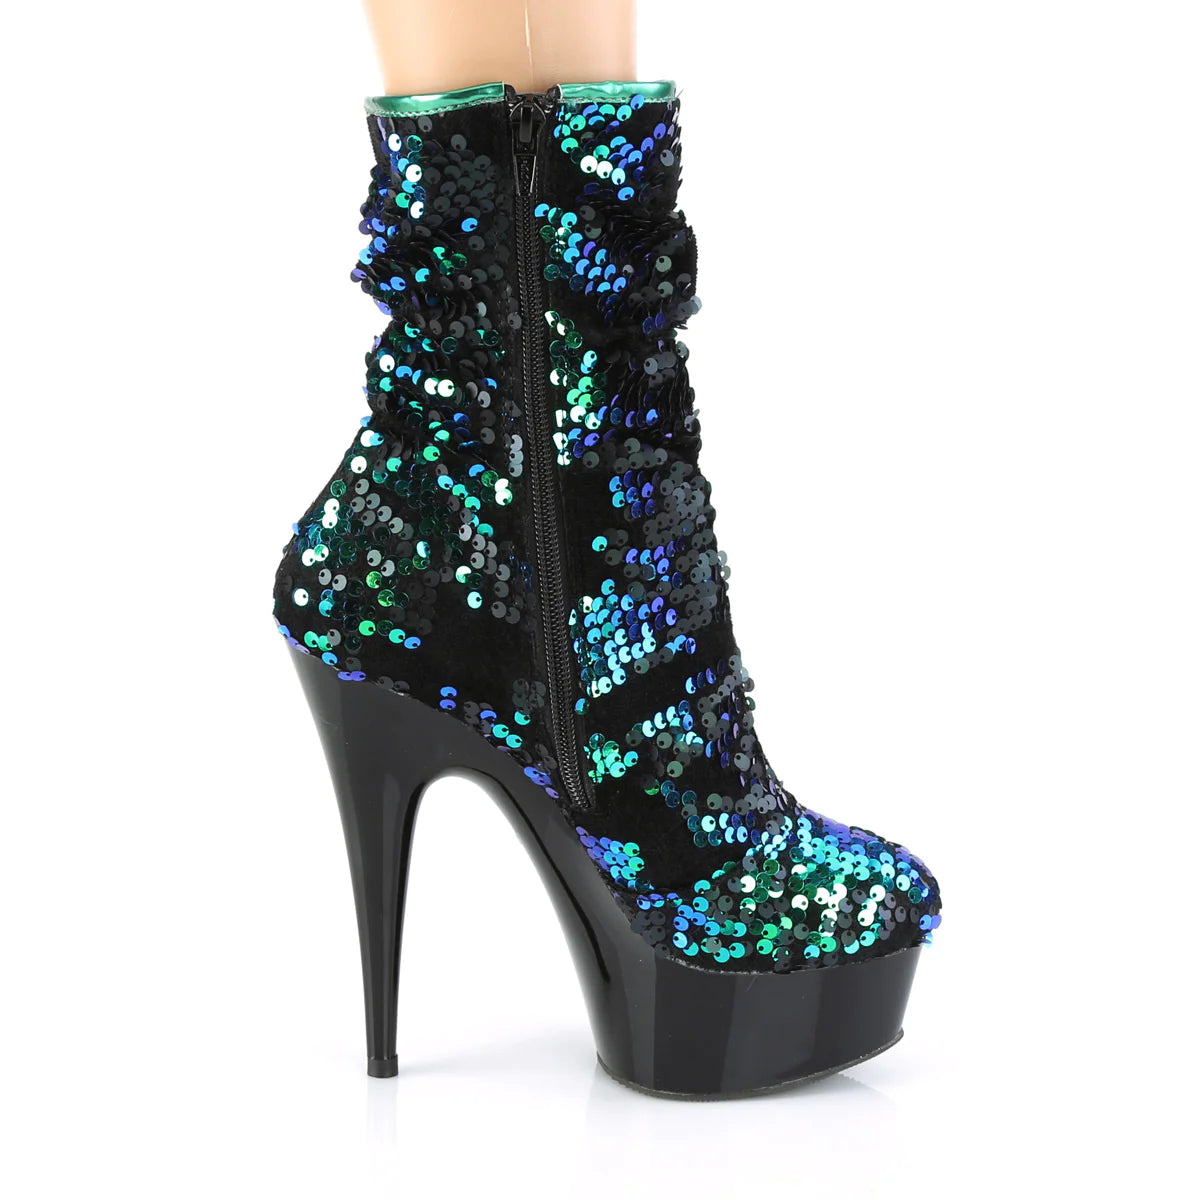 PLEASER DELIGHT-1004 GREEN IRIDESCENT SEQUIN 6 INCH HIGH HEEL ANKLE BOOTS SIZE 8 USA SALE